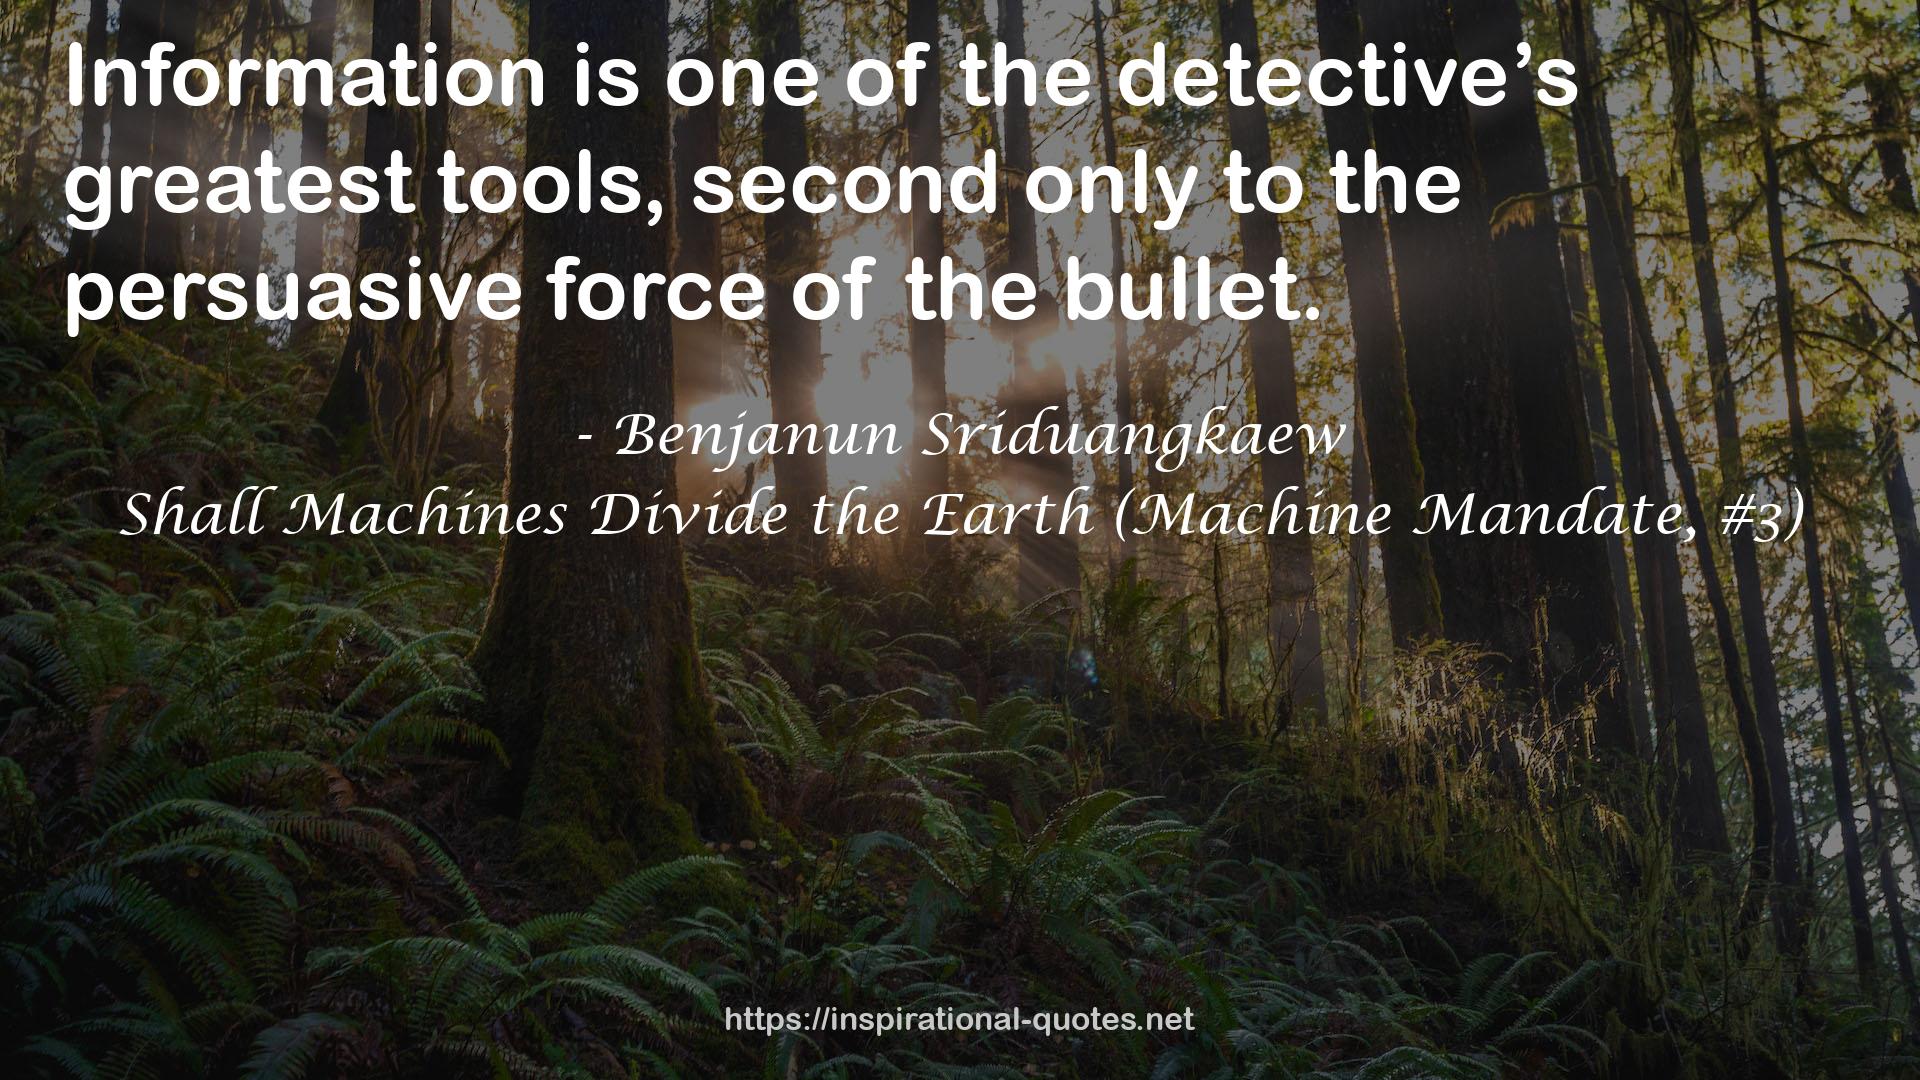 Shall Machines Divide the Earth (Machine Mandate, #3) QUOTES